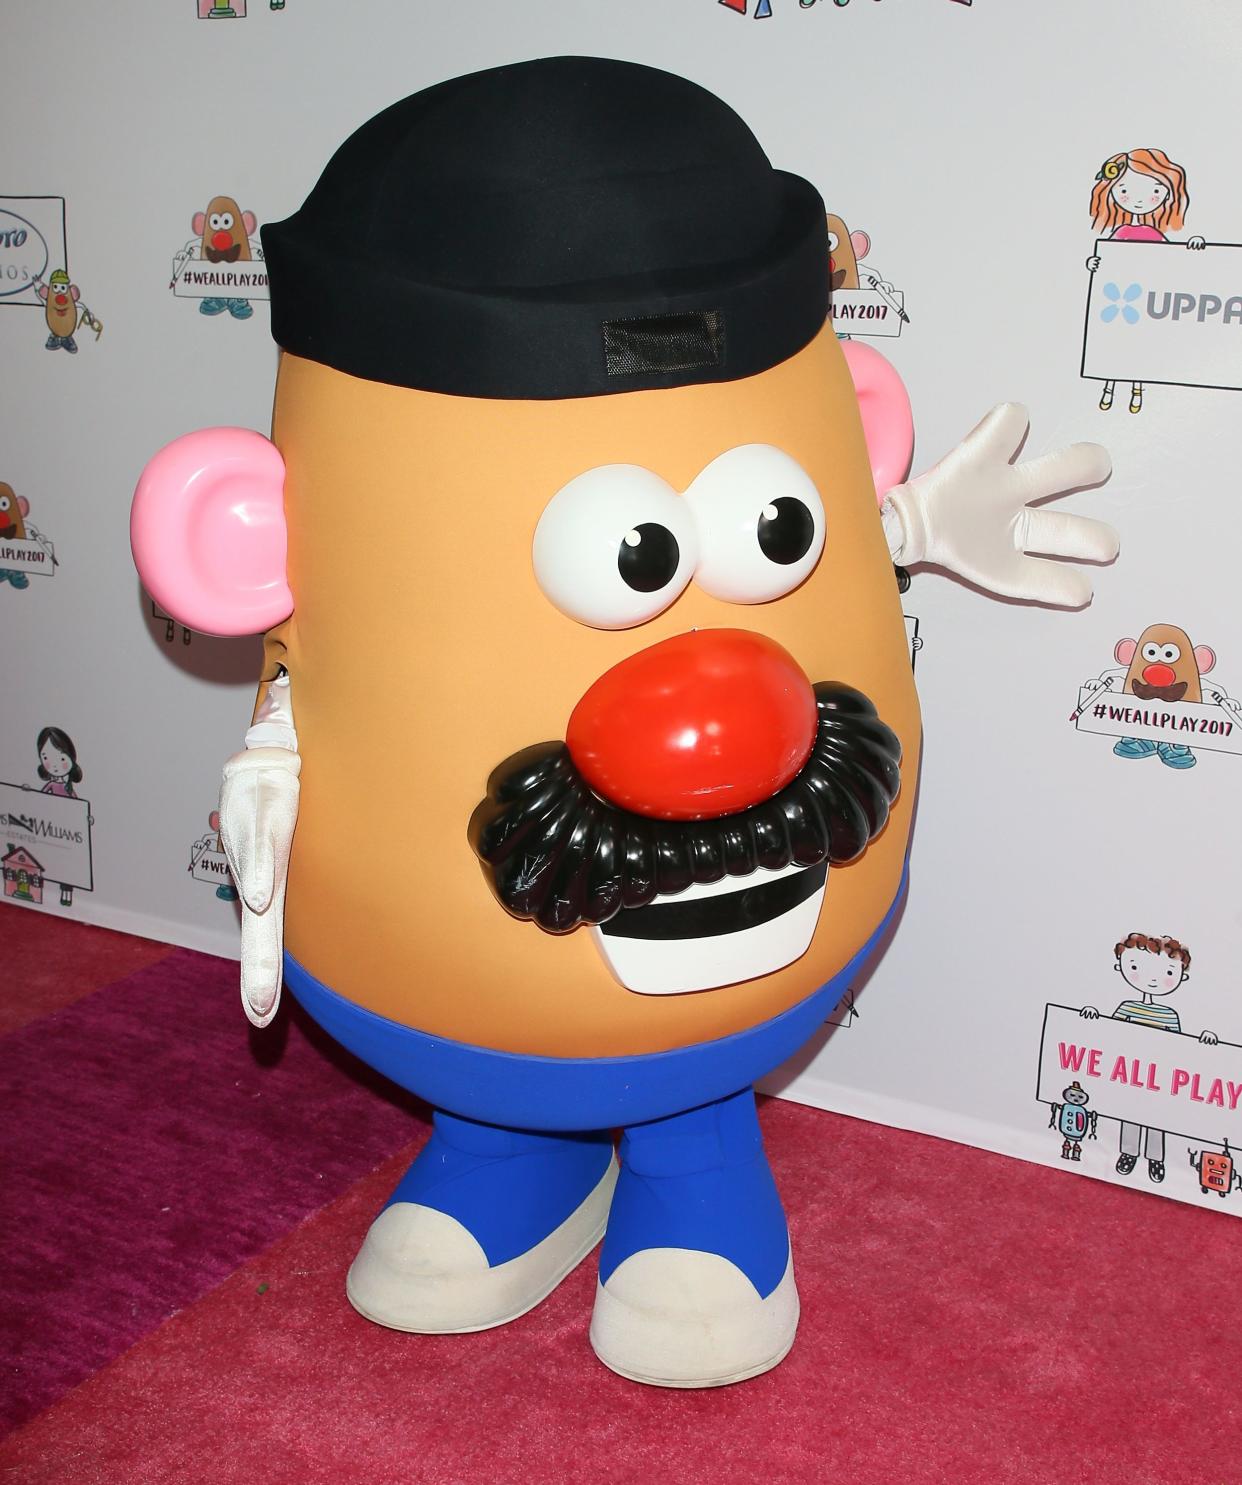 Potato Head attends the Zimmer Children's Museum Event in Los Angeles, he is looking towards the right, standing on a red carpet with a advertising on white background, 2017